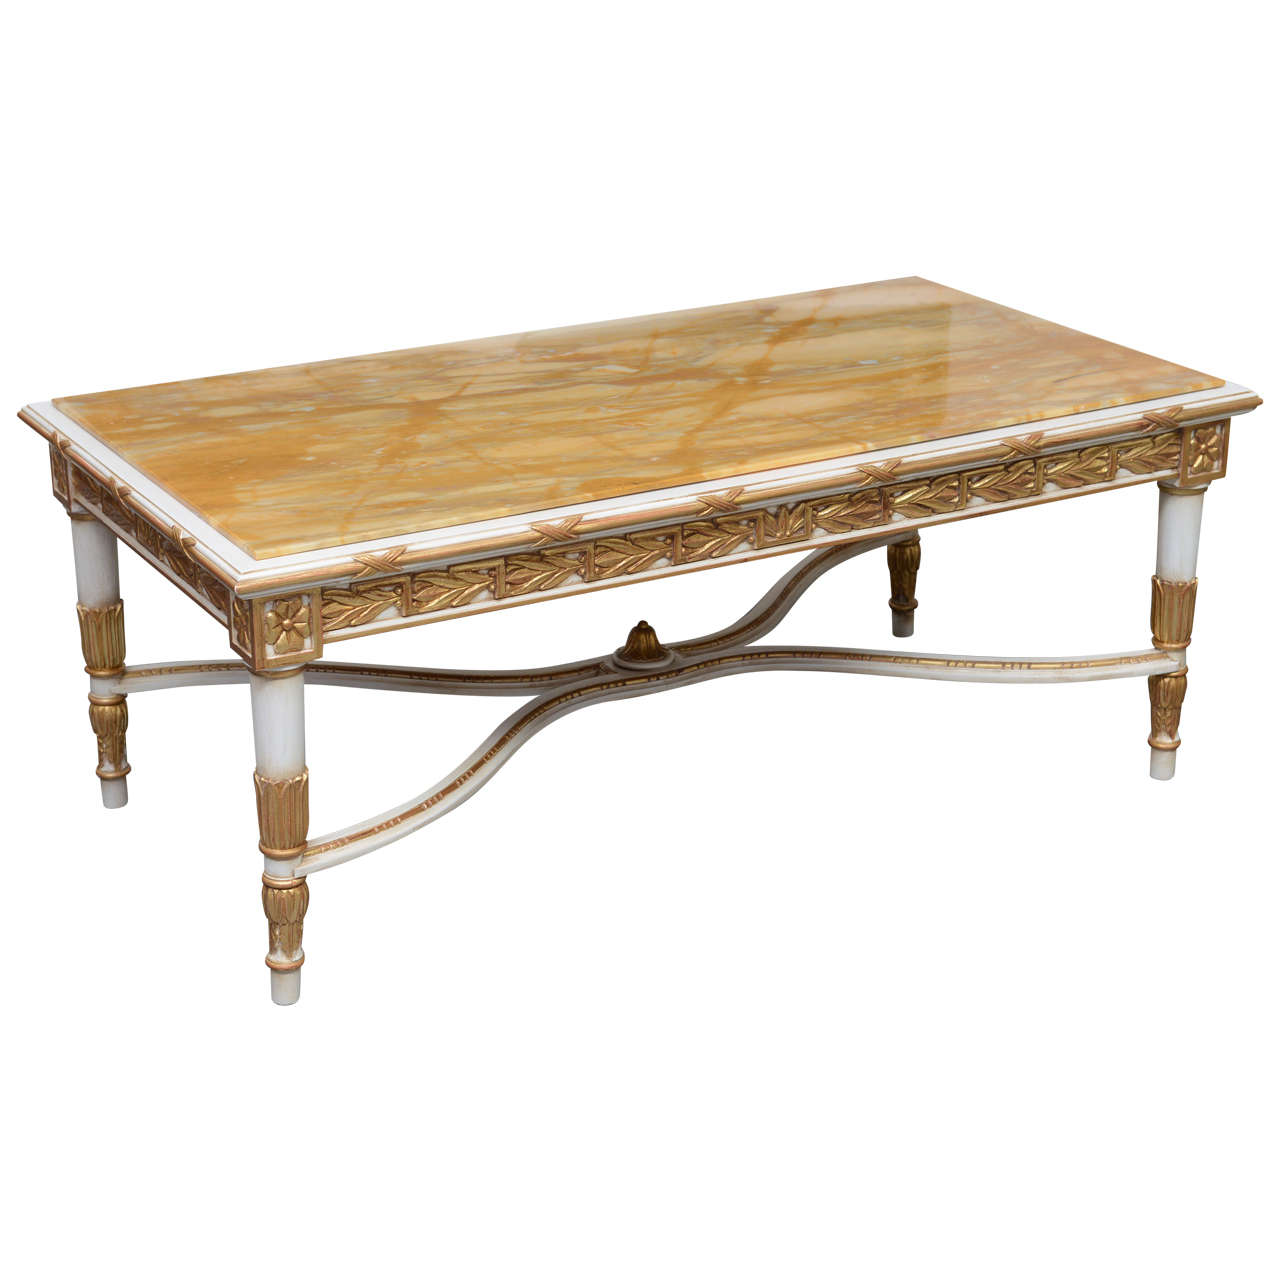 Italian Neoclassic Style Marble-Top, Painted and Parcel-Gilt Low Table For Sale